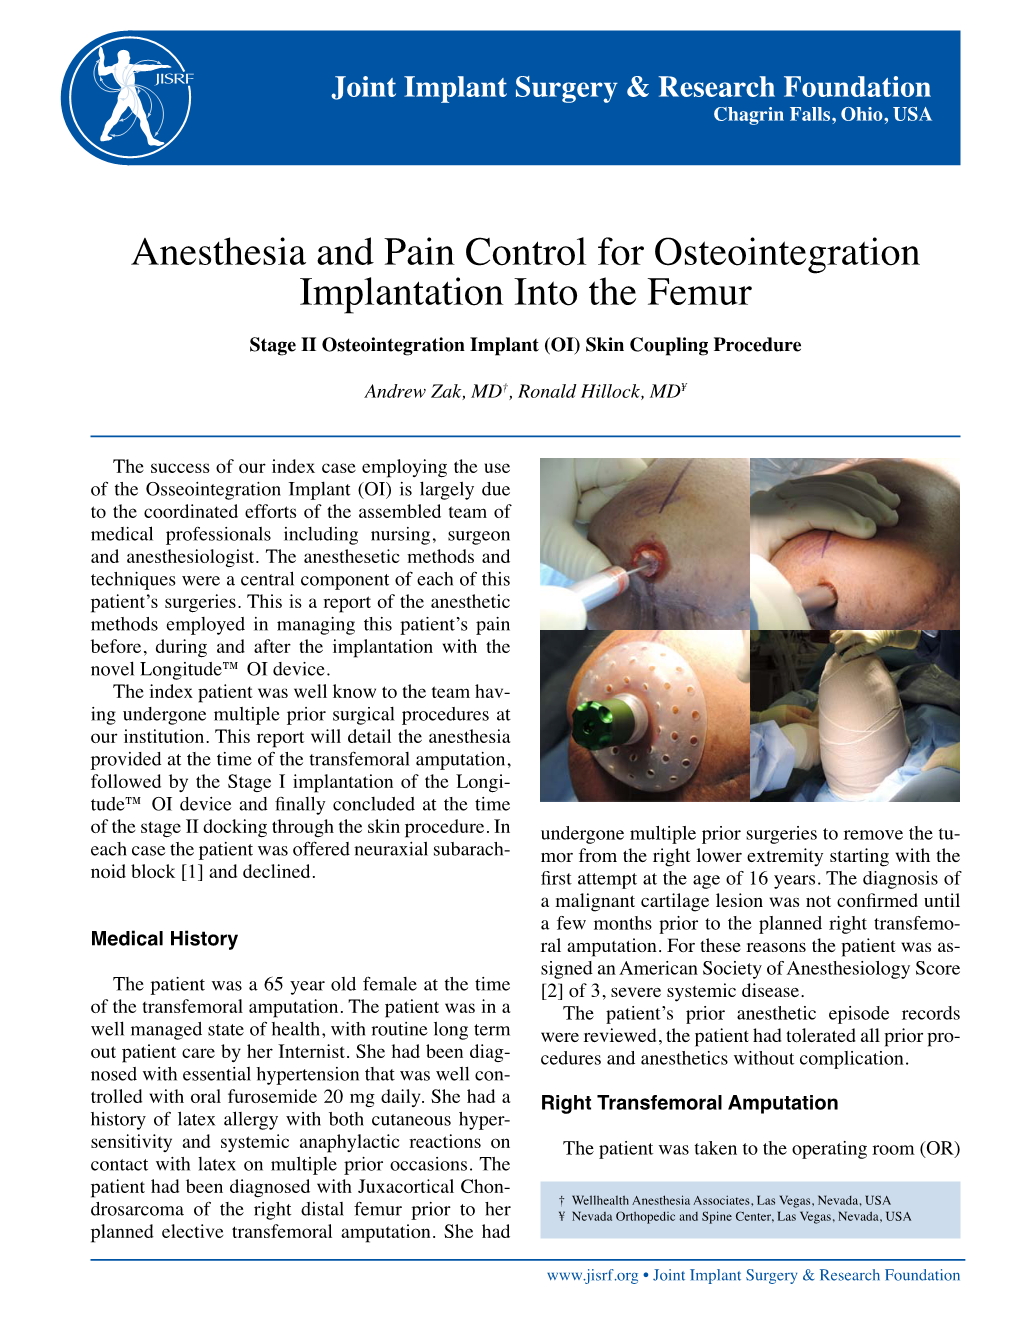 Anesthesia and Pain Control for Osteointegration Implantation Into the Femur Stage II Osteointegration Implant (OI) Skin Coupling Procedure